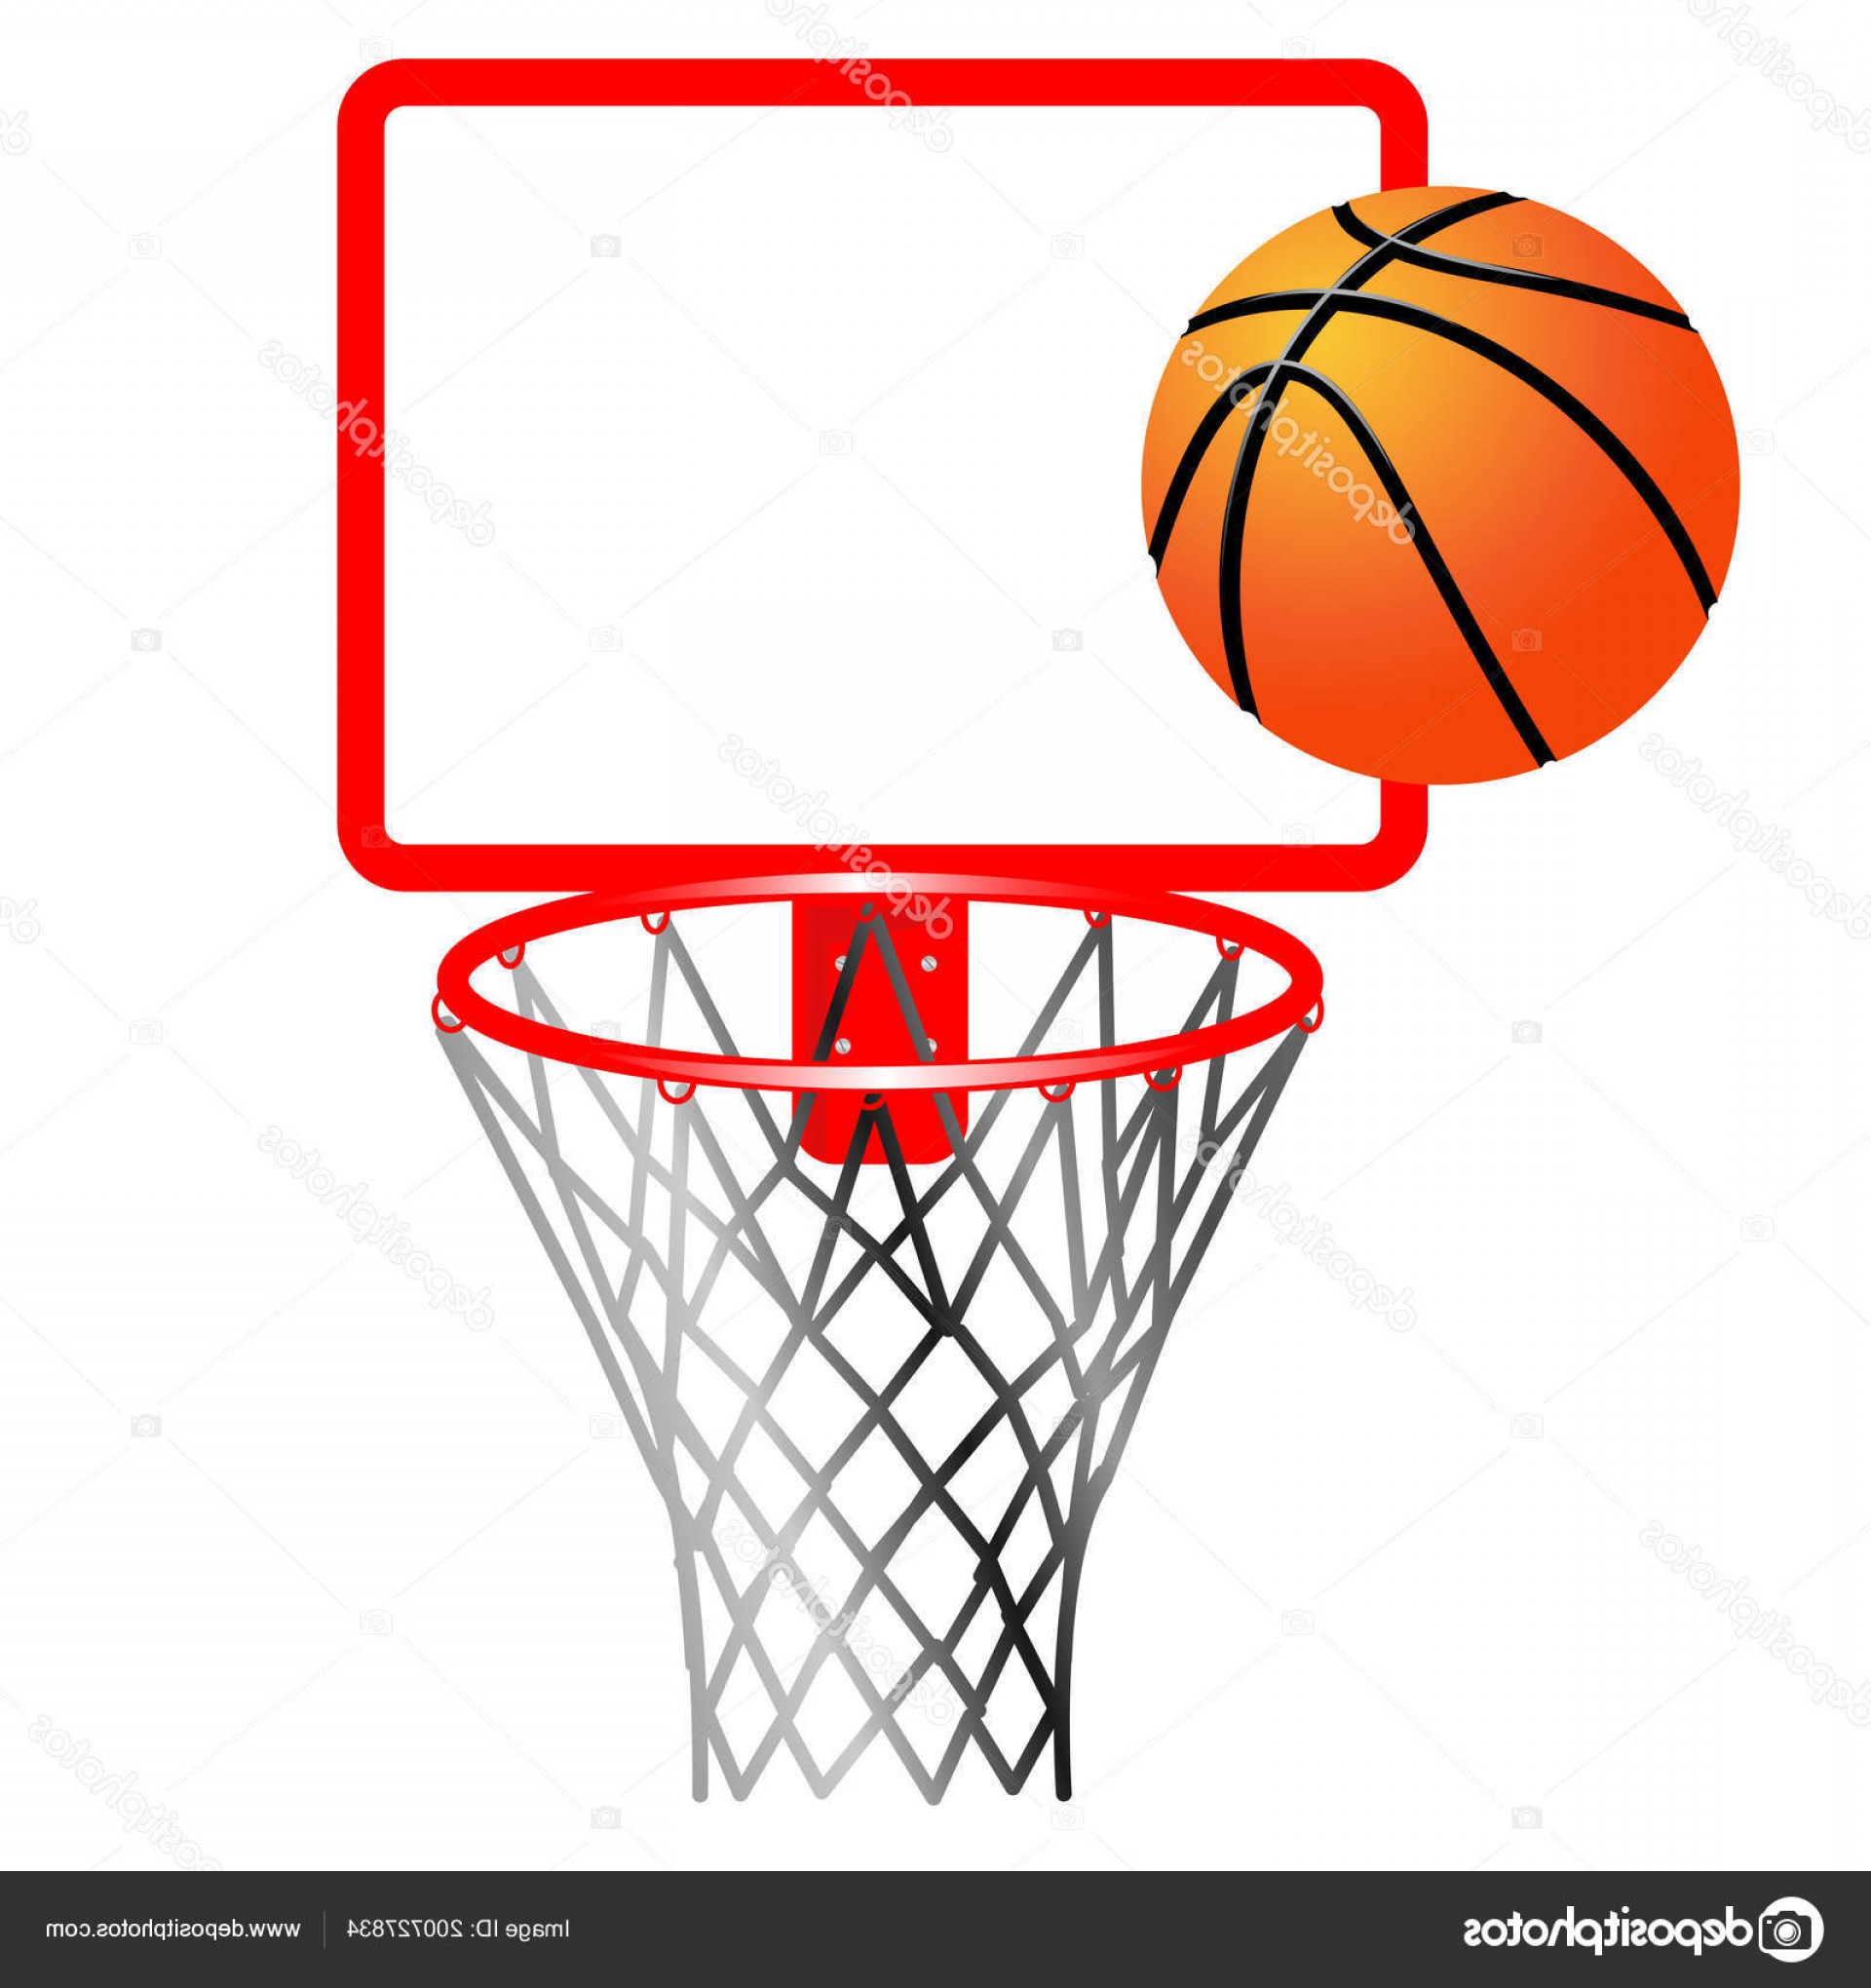 Drawing a realistic basketball goal